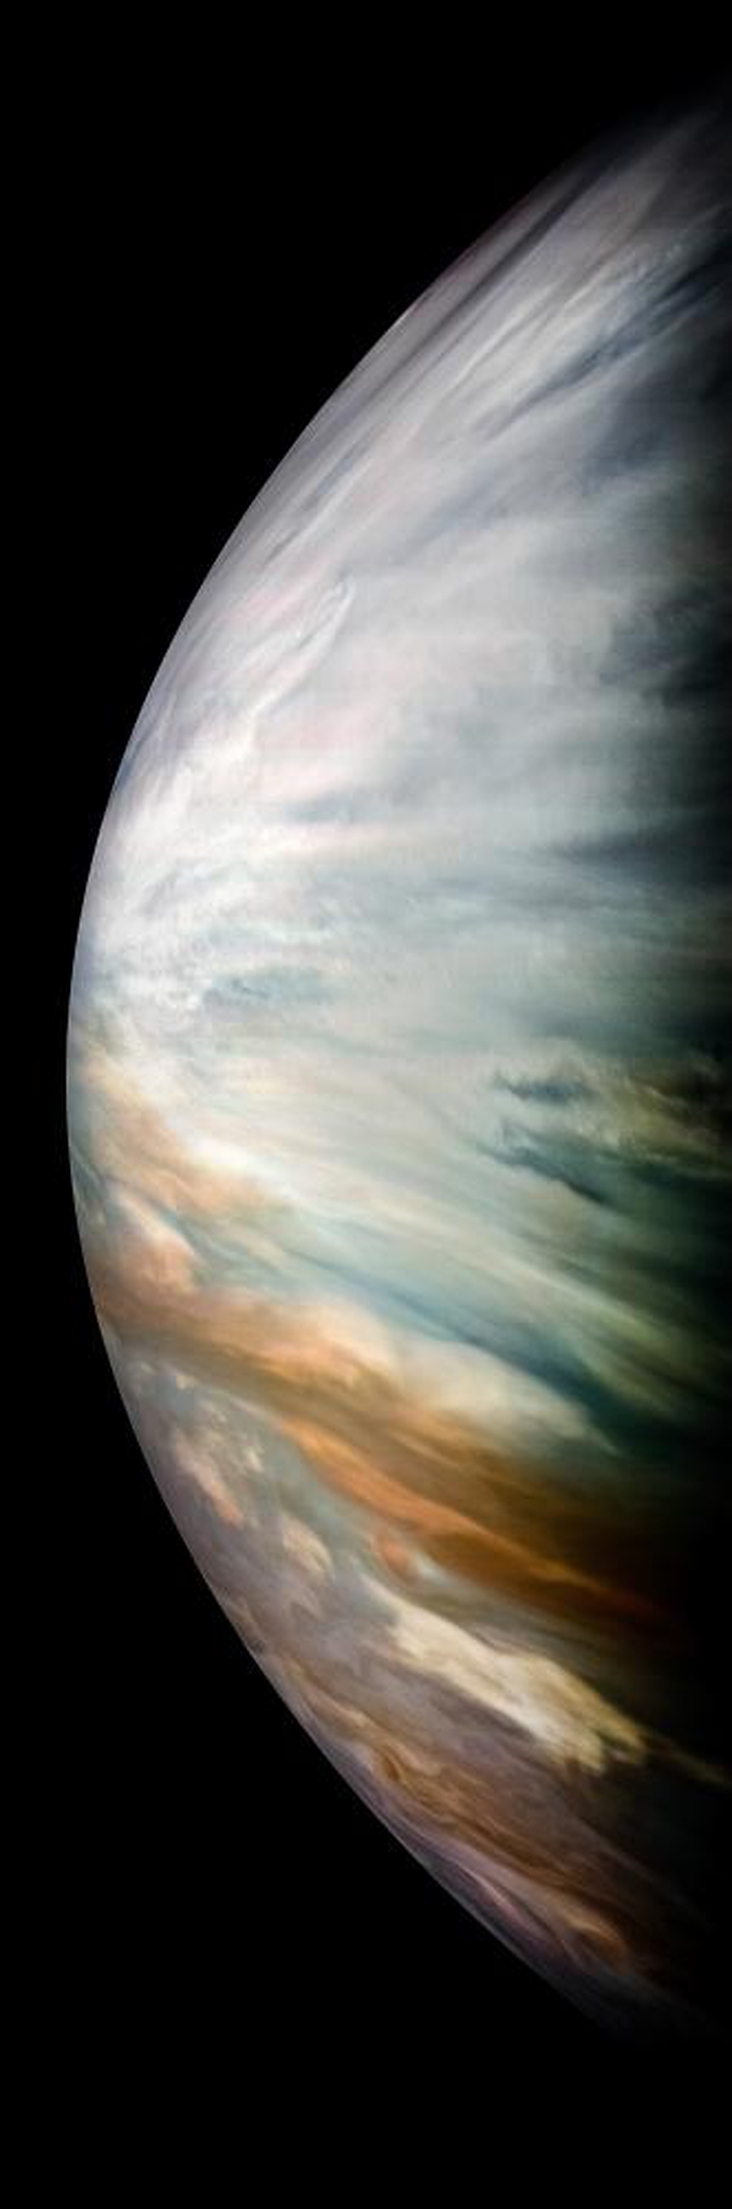 The water mistery of Jupiter